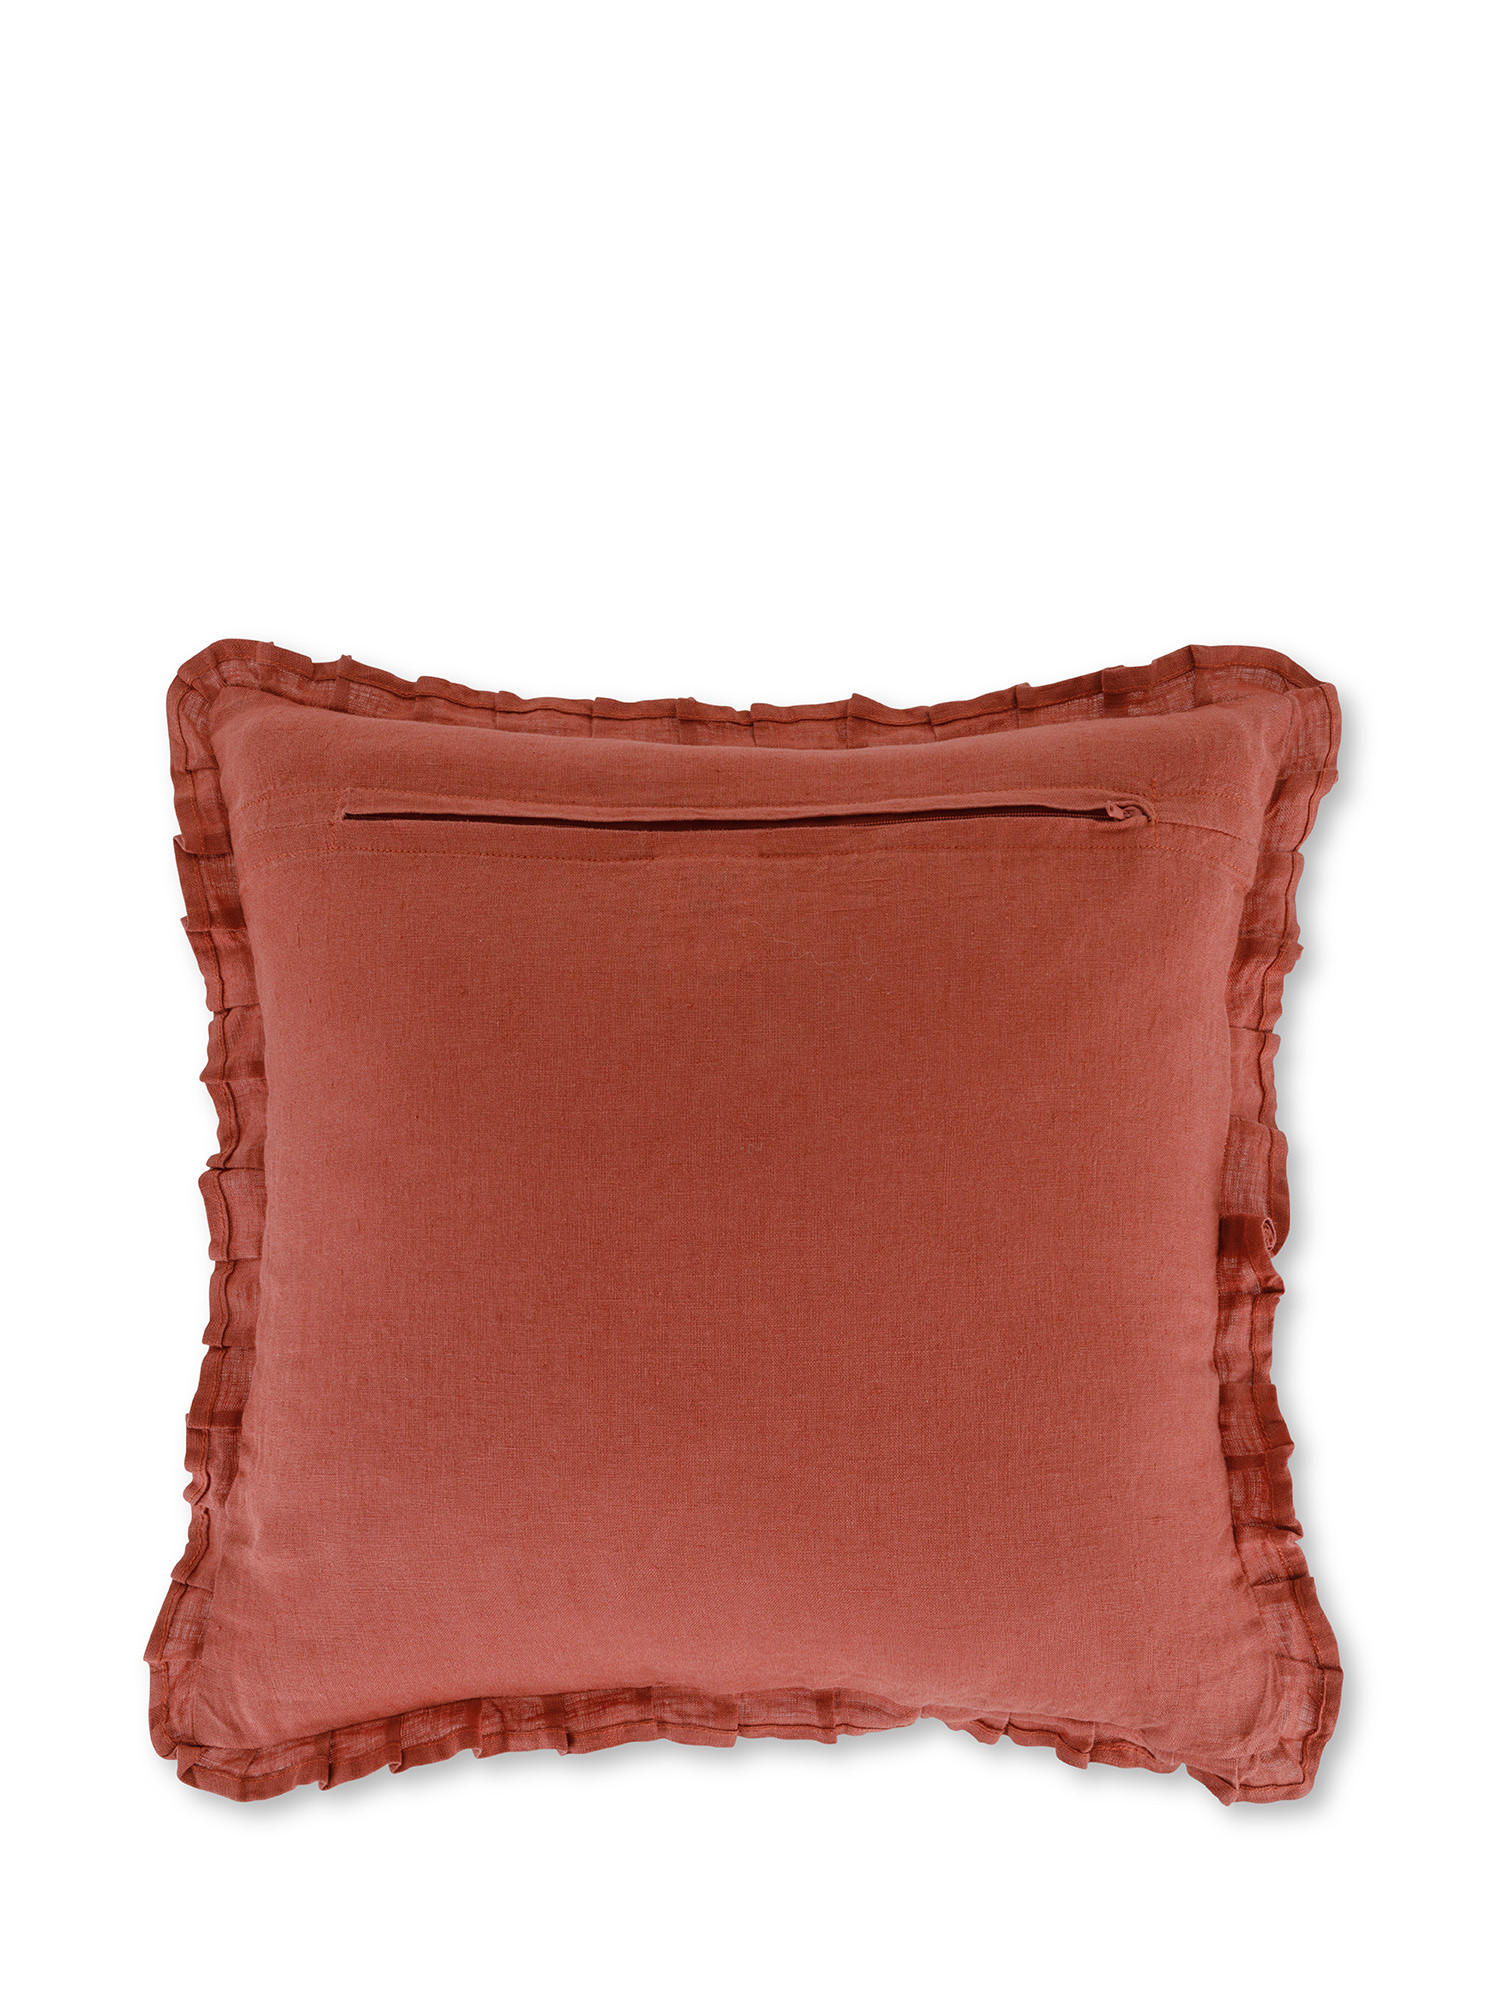 Striped cushion in pure linen 40x40 cm, Copper Brown, large image number 1